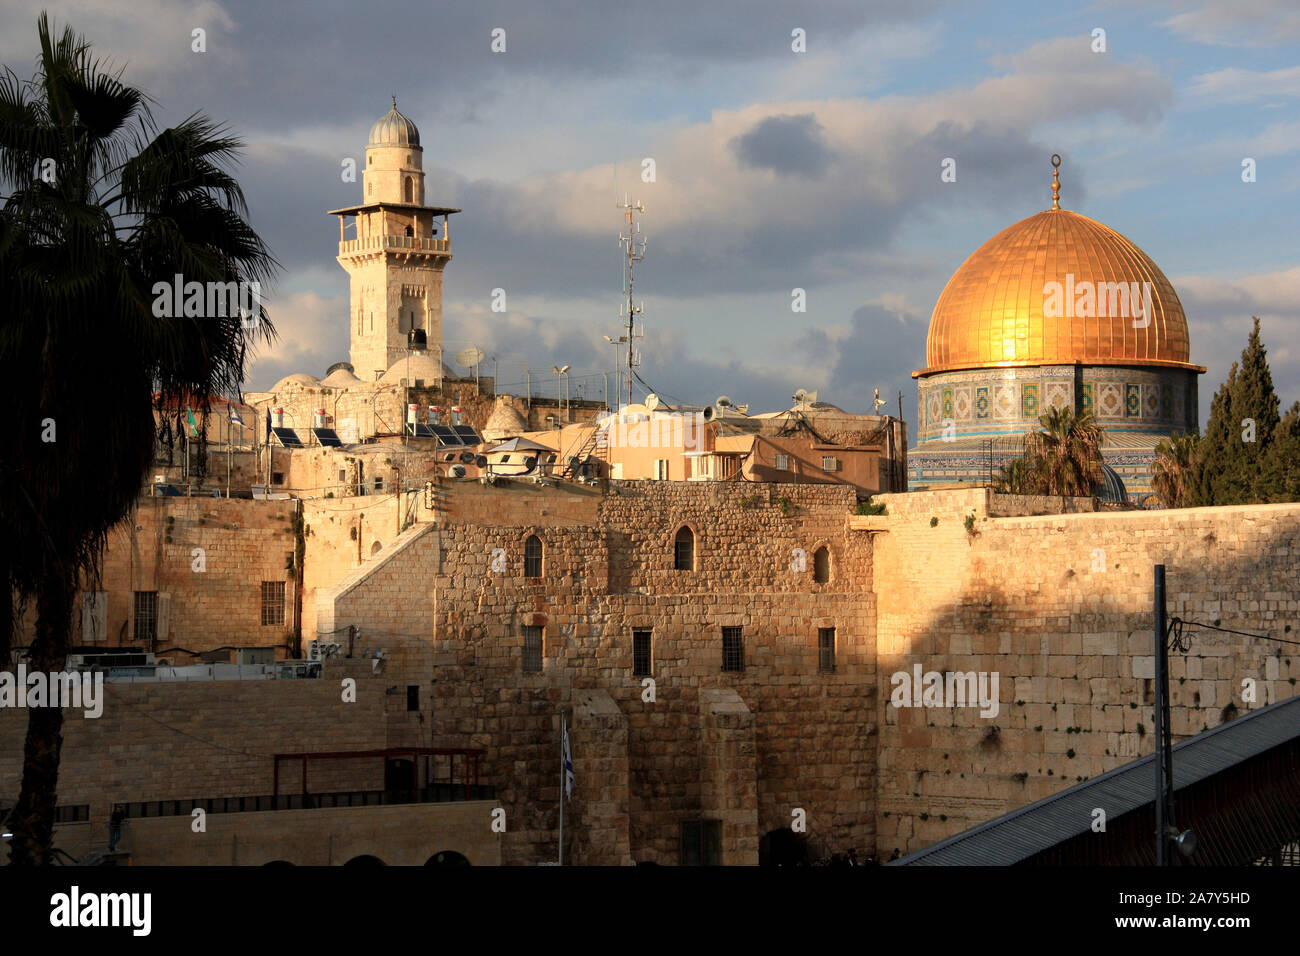 Western Wall and the Dome of the Rock in the holy city of Jerusalem, Israel, during sunset with cloudy sky Stock Photo